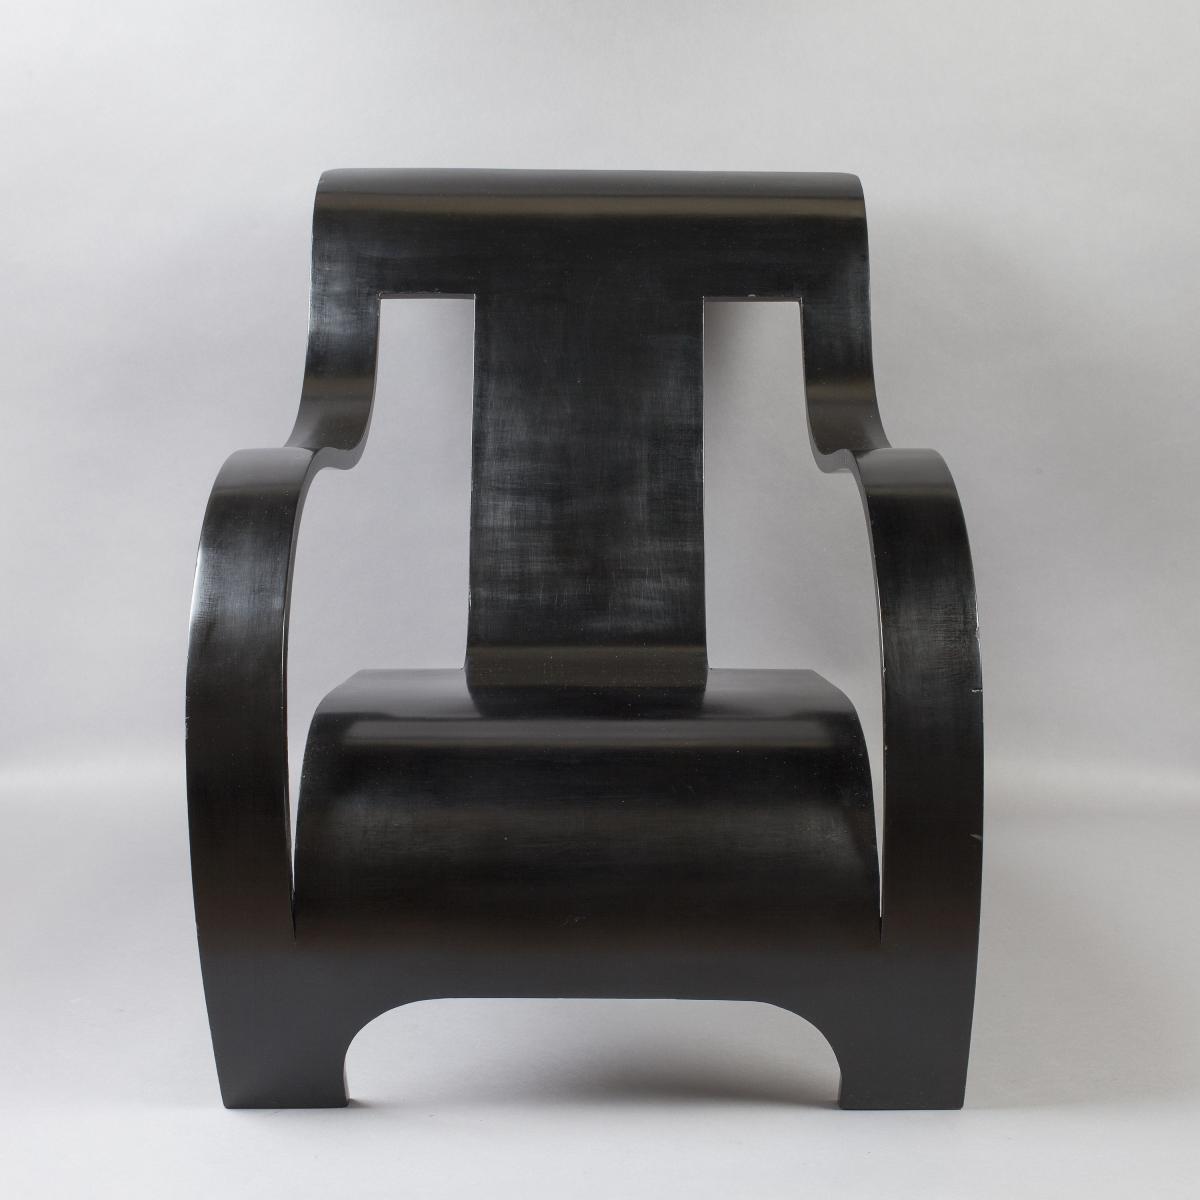 A Black Bent Plywood Armchair - Made by Makers of Simple Furniture (1931-1940)